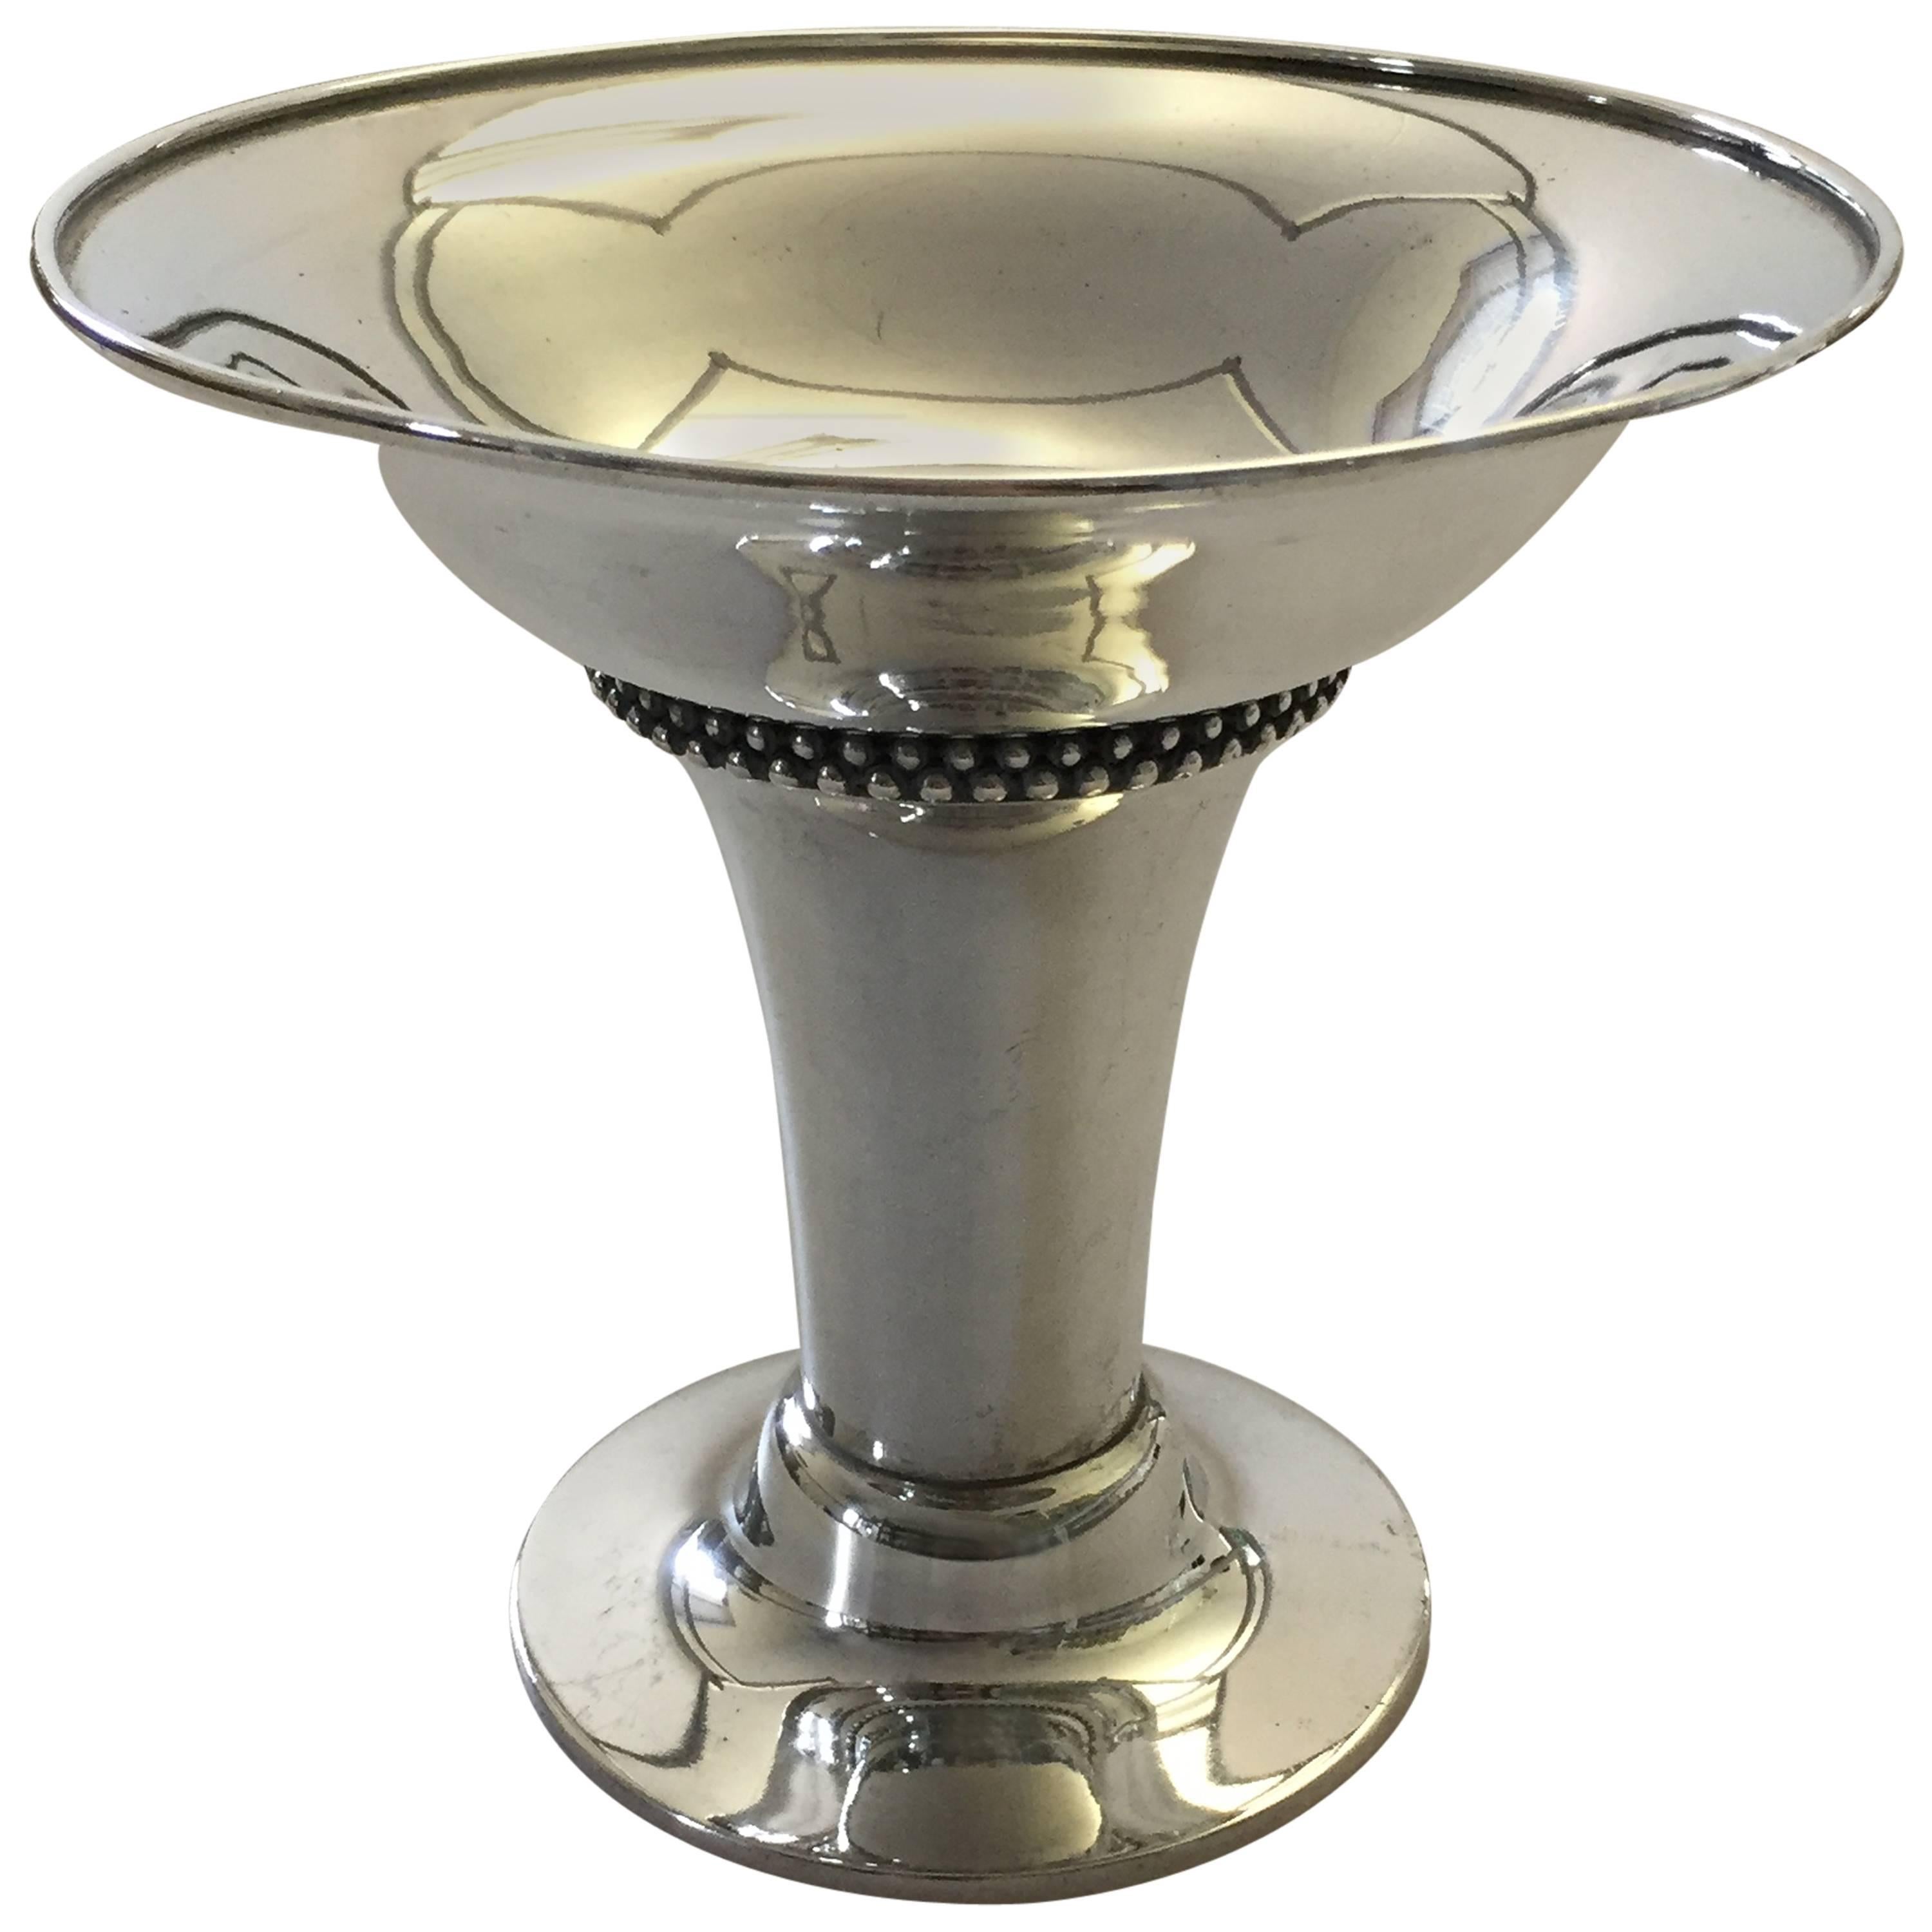 Mogens Ballin Silver Vase or Centerpiece from 1922 For Sale